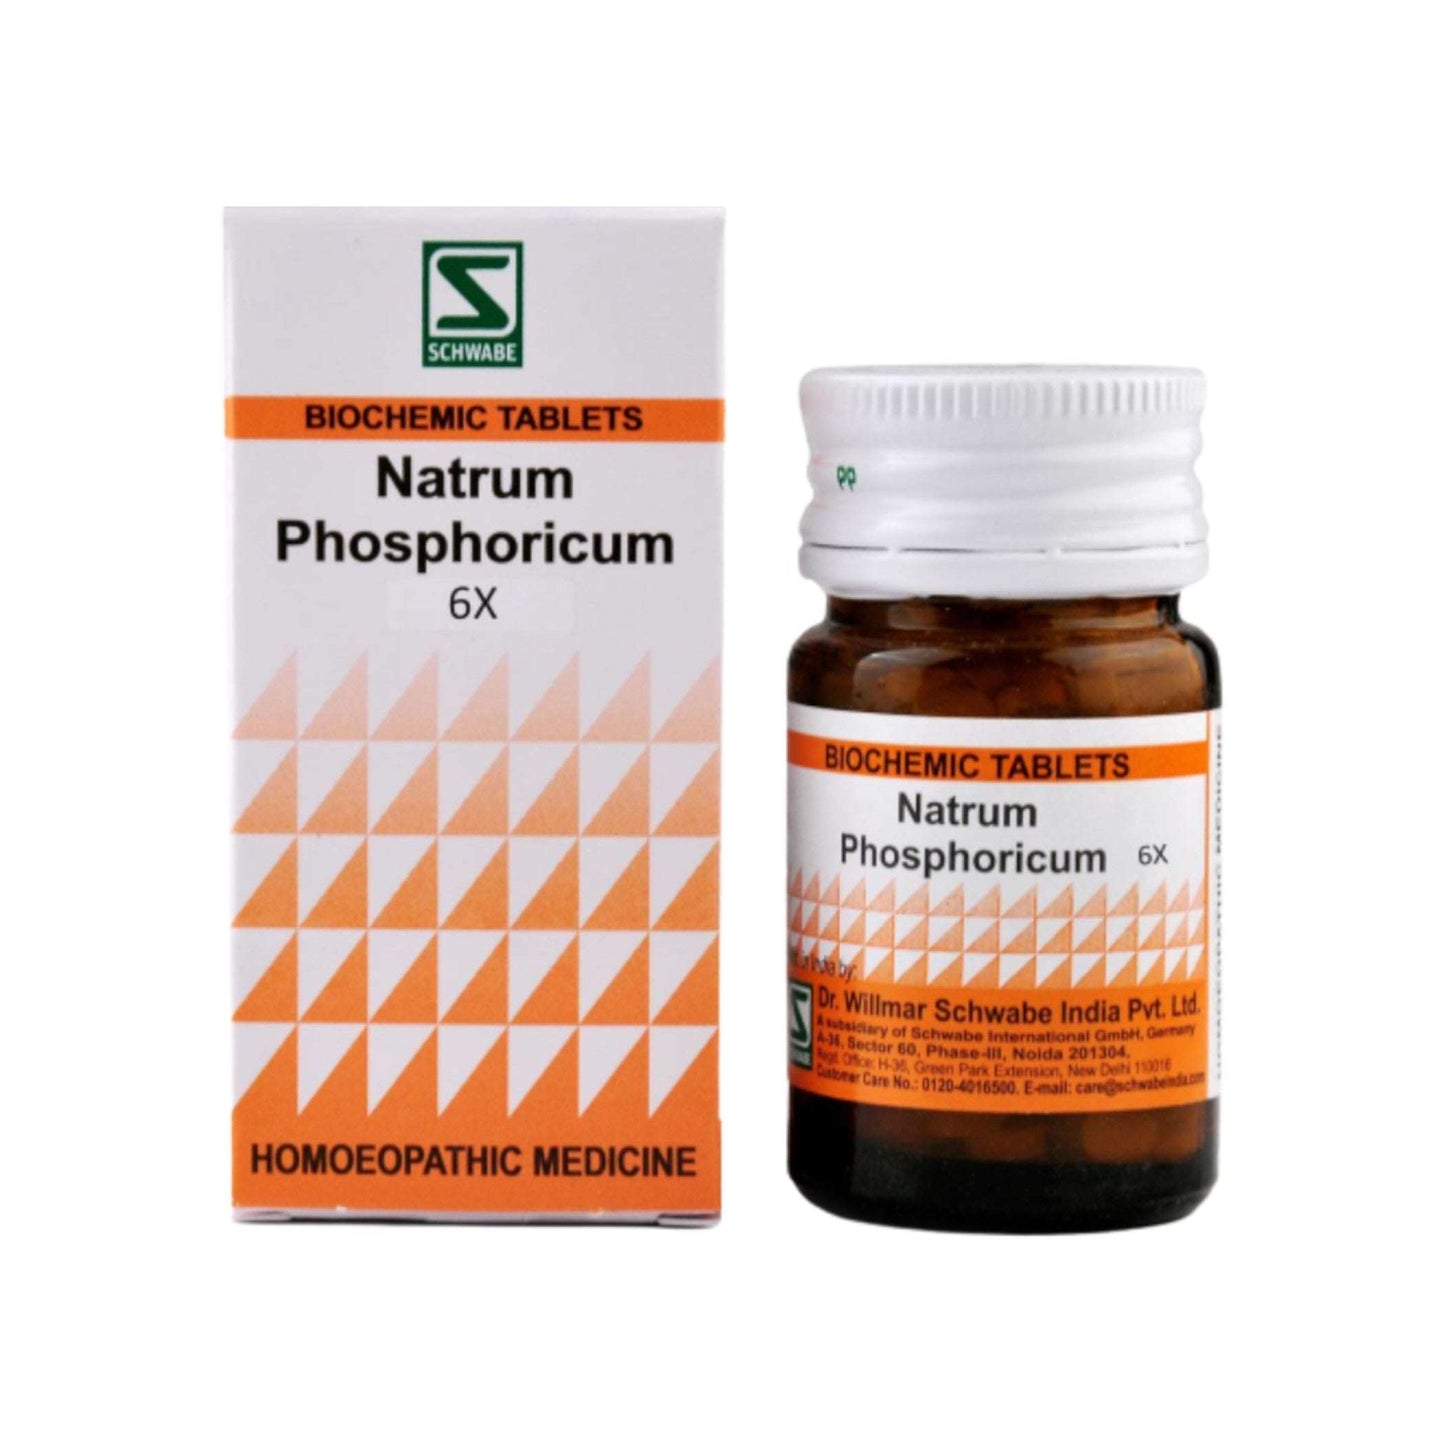 Image: Dr. Schwabe Homeopathy Natrium Phosphoricum 6x Tablets 20 g - A remedy for digestive health and acid-alkaline balance.